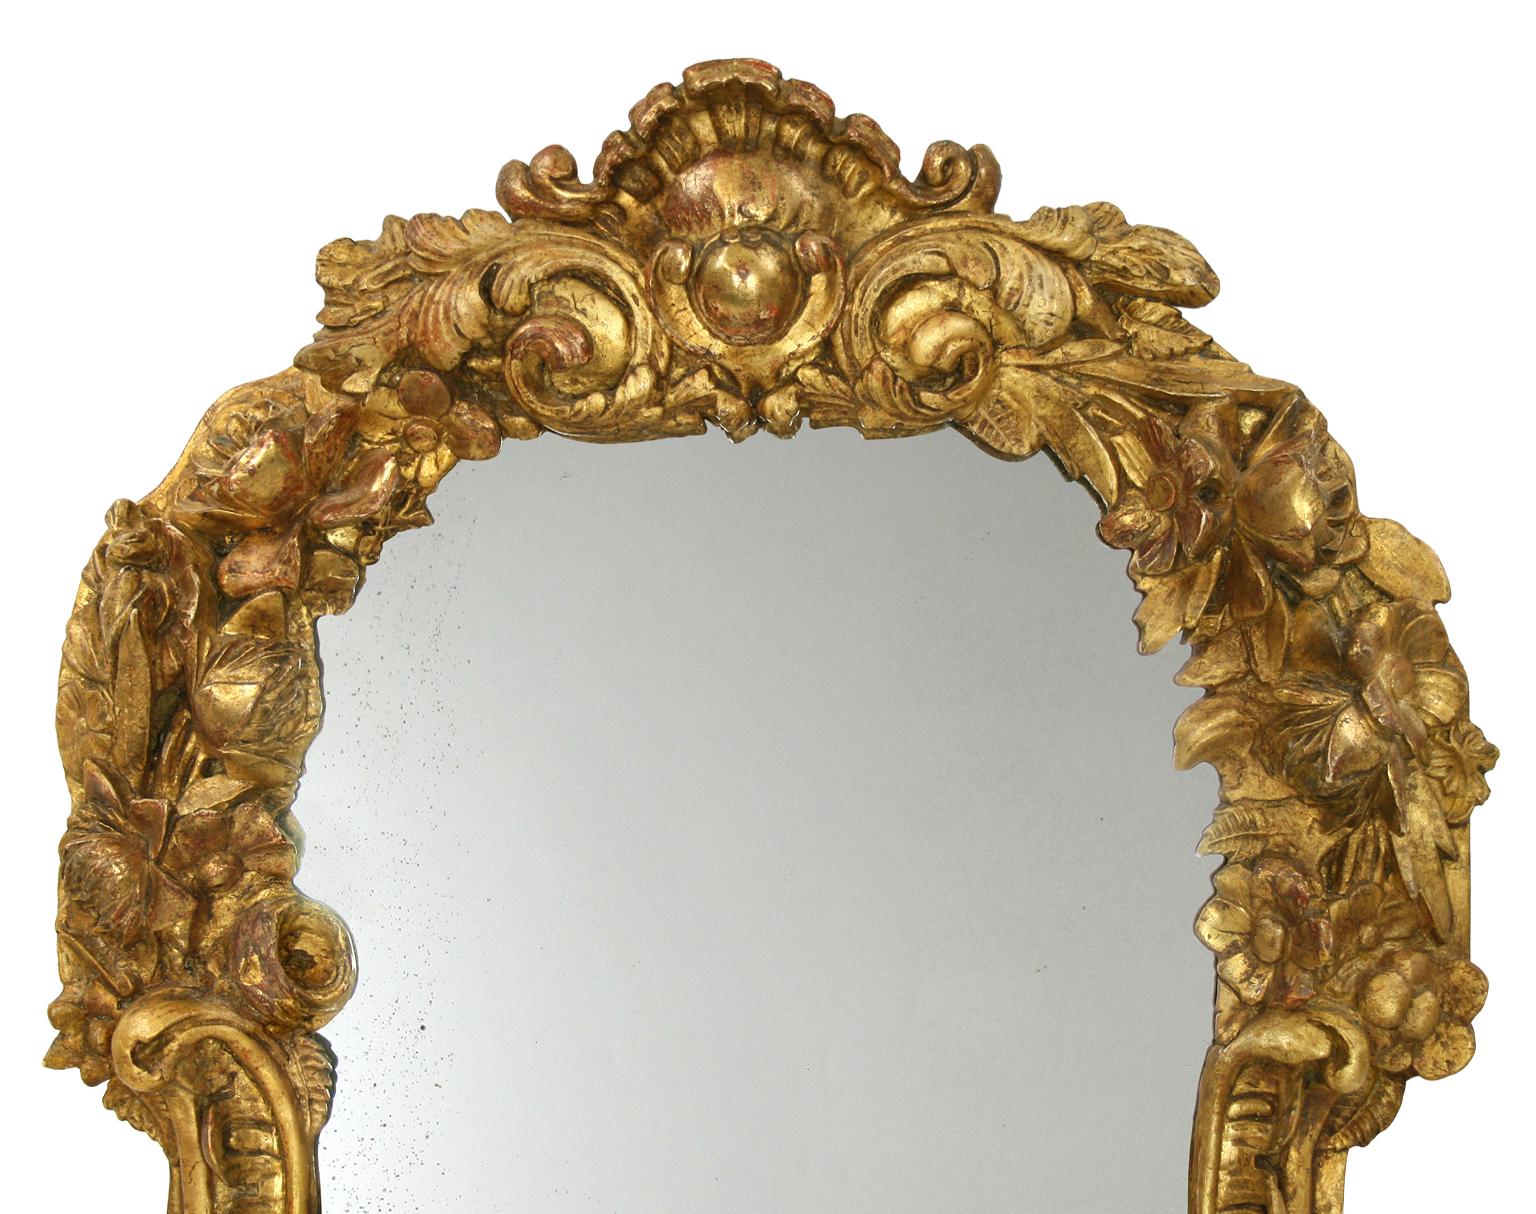 Rare French antique giltwood mirror, wedding mirror late 19th century. Carved wood, composition garlands of flowers, gilded in fine gold (Original gilding). Antique wood back. Silver antique glass mirror. Measures: Antique frame width: 5.5 / 10 cm.